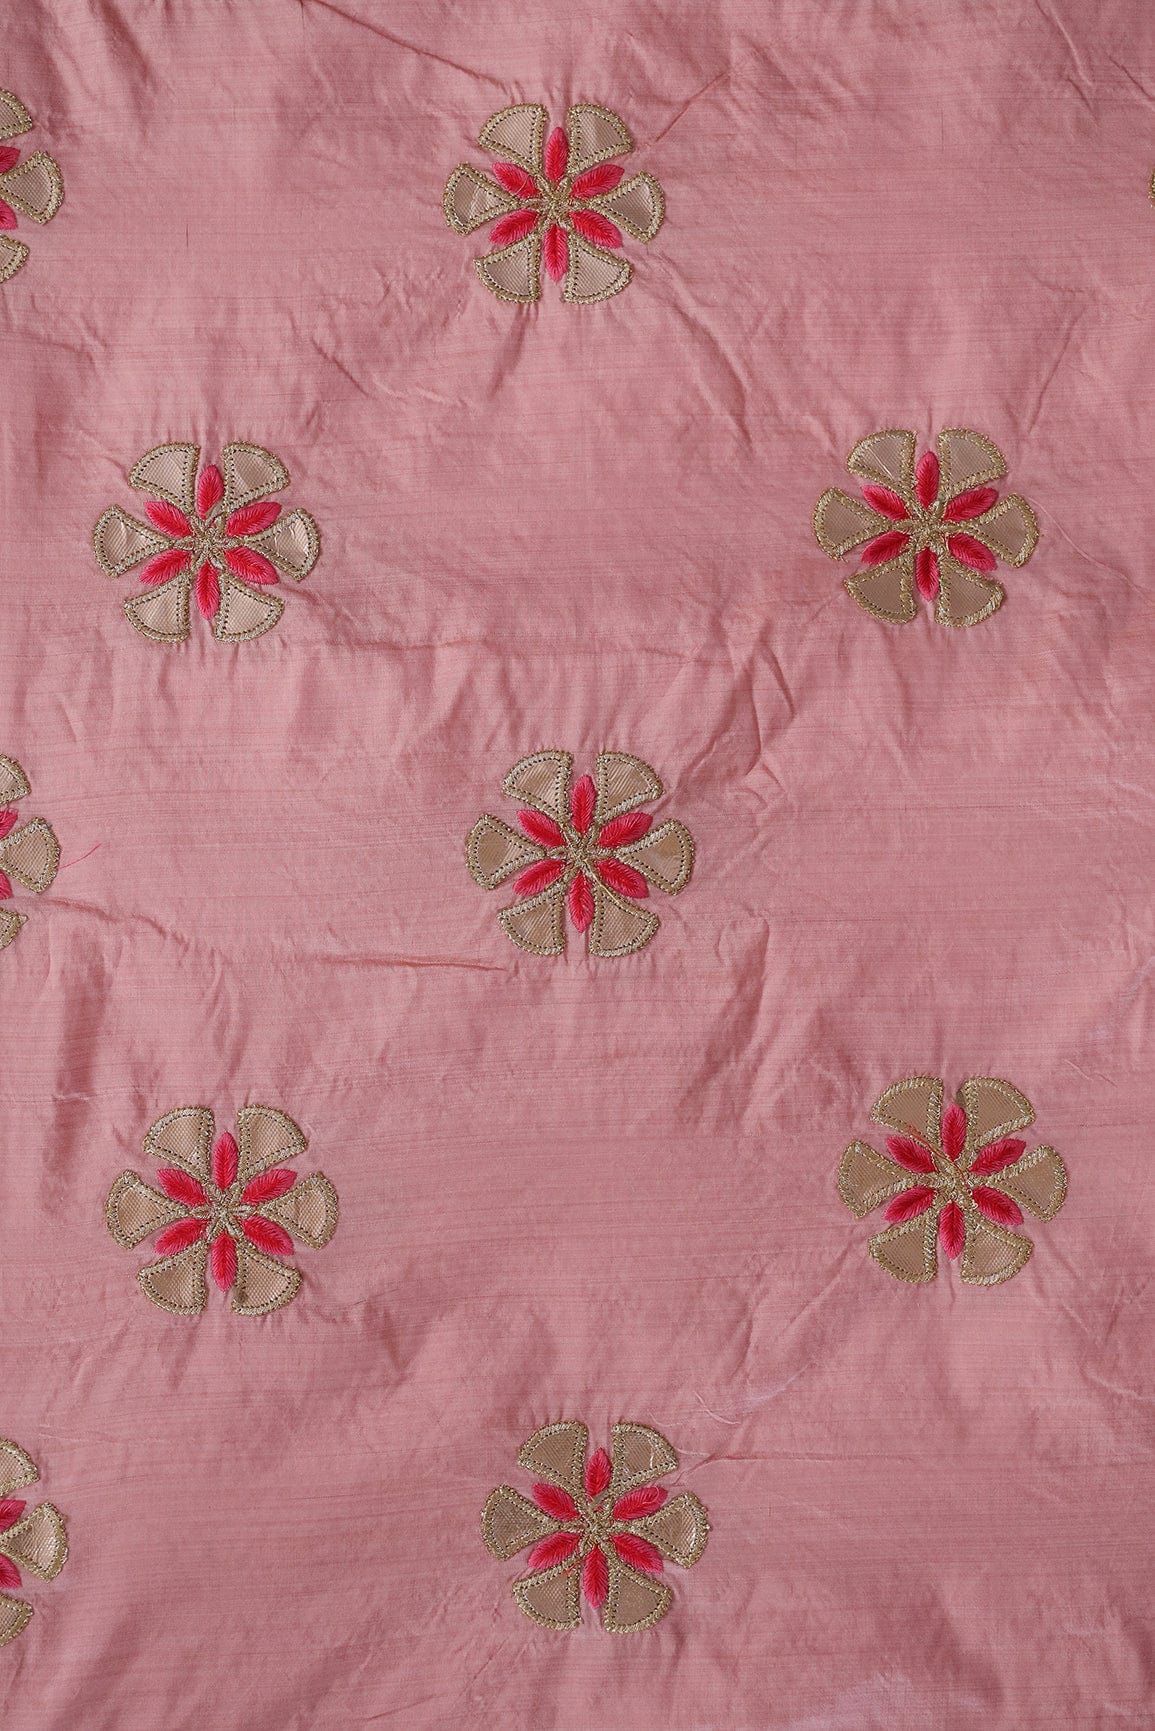 doeraa Embroidery Fabrics Zari With Red and Pink Motif Embroidery On Baby Pink Bamboo Silk Fabric